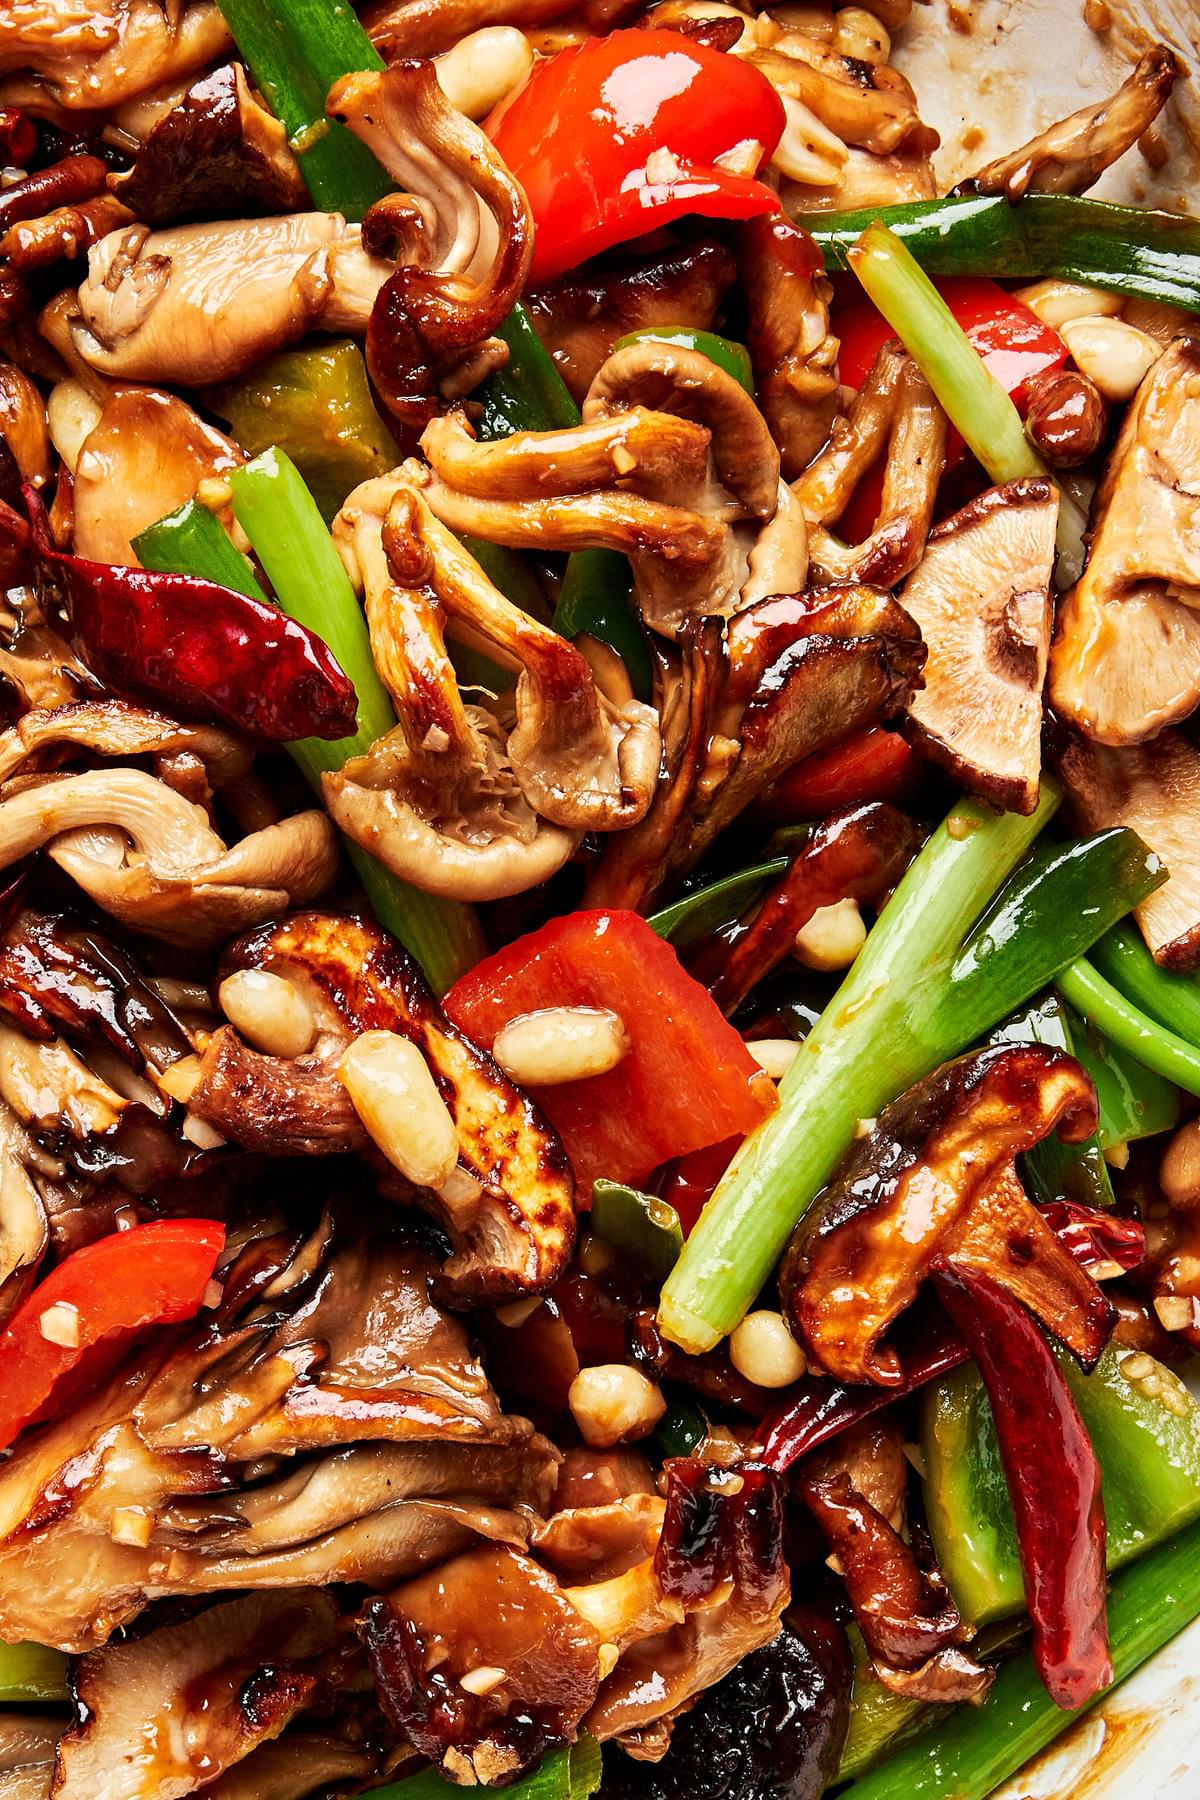 kung pao mushrooms with bell peppers, green onions and peanuts